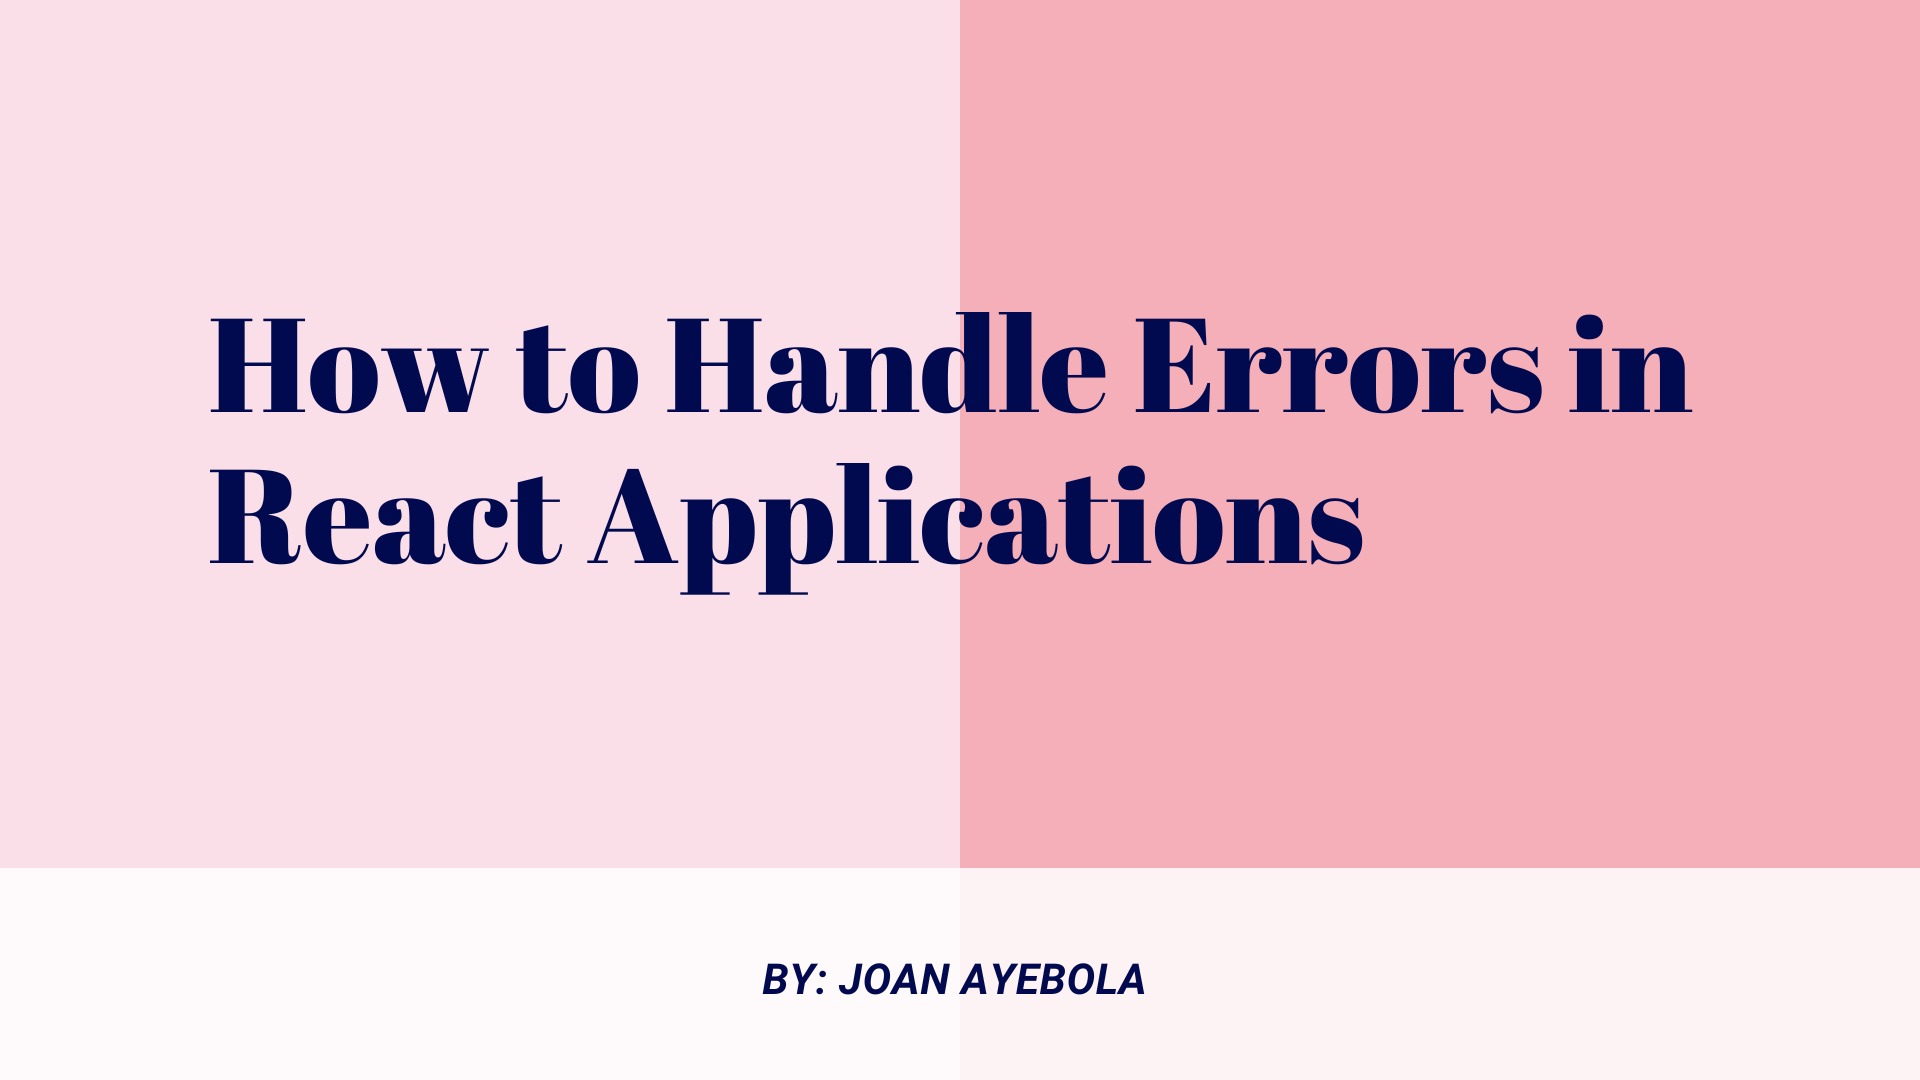 How to Handle Errors in React Applications